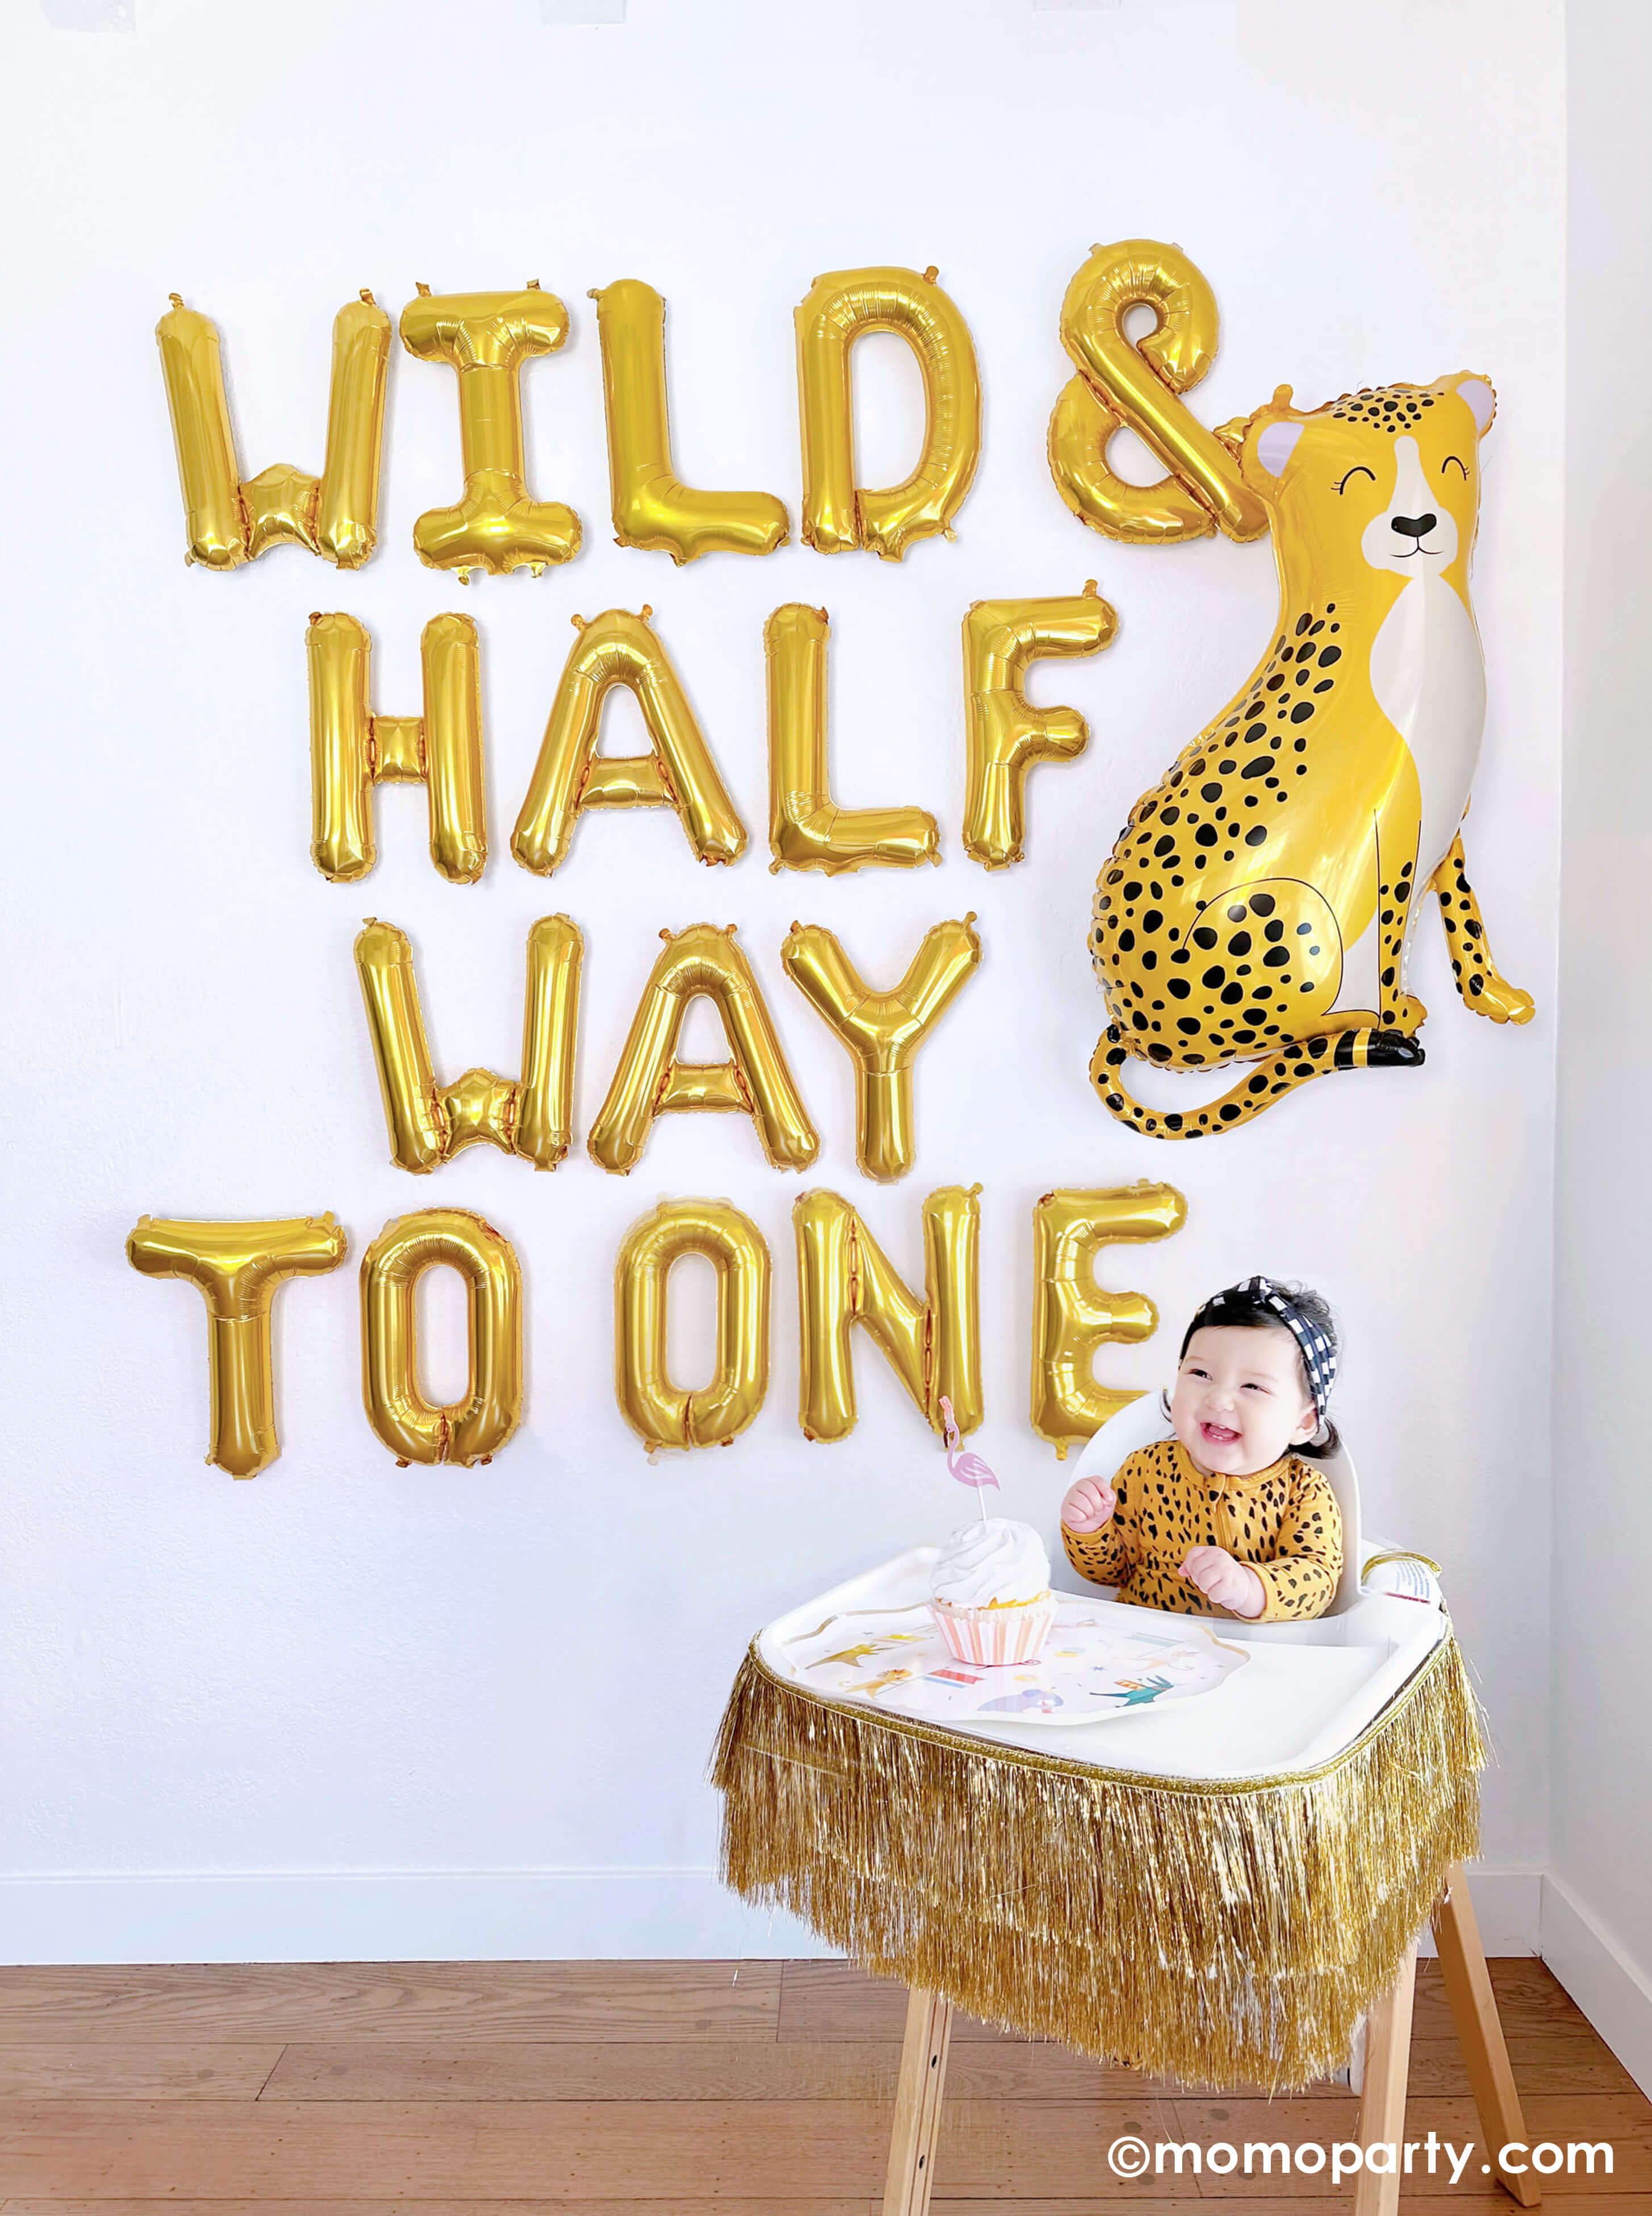 A balloon wall featuring Momo Party's Wild & Half Way To One" 16" Mylar Letter Balloons by Northstar Letter Balloons and Momo Party's 40" baby cheetah shaped foil balloon by Betallic Balloons. Next to the balloon wall, a happy smiley 6-month baby girl in her cheetah print onese sits in a highchair decorated with Meri Meri's gold tinsel garland, on her tray, a cupcake topped with a cute flamingo shaped topper , all makes a great inspiration for an adorable baby's half birthday party.